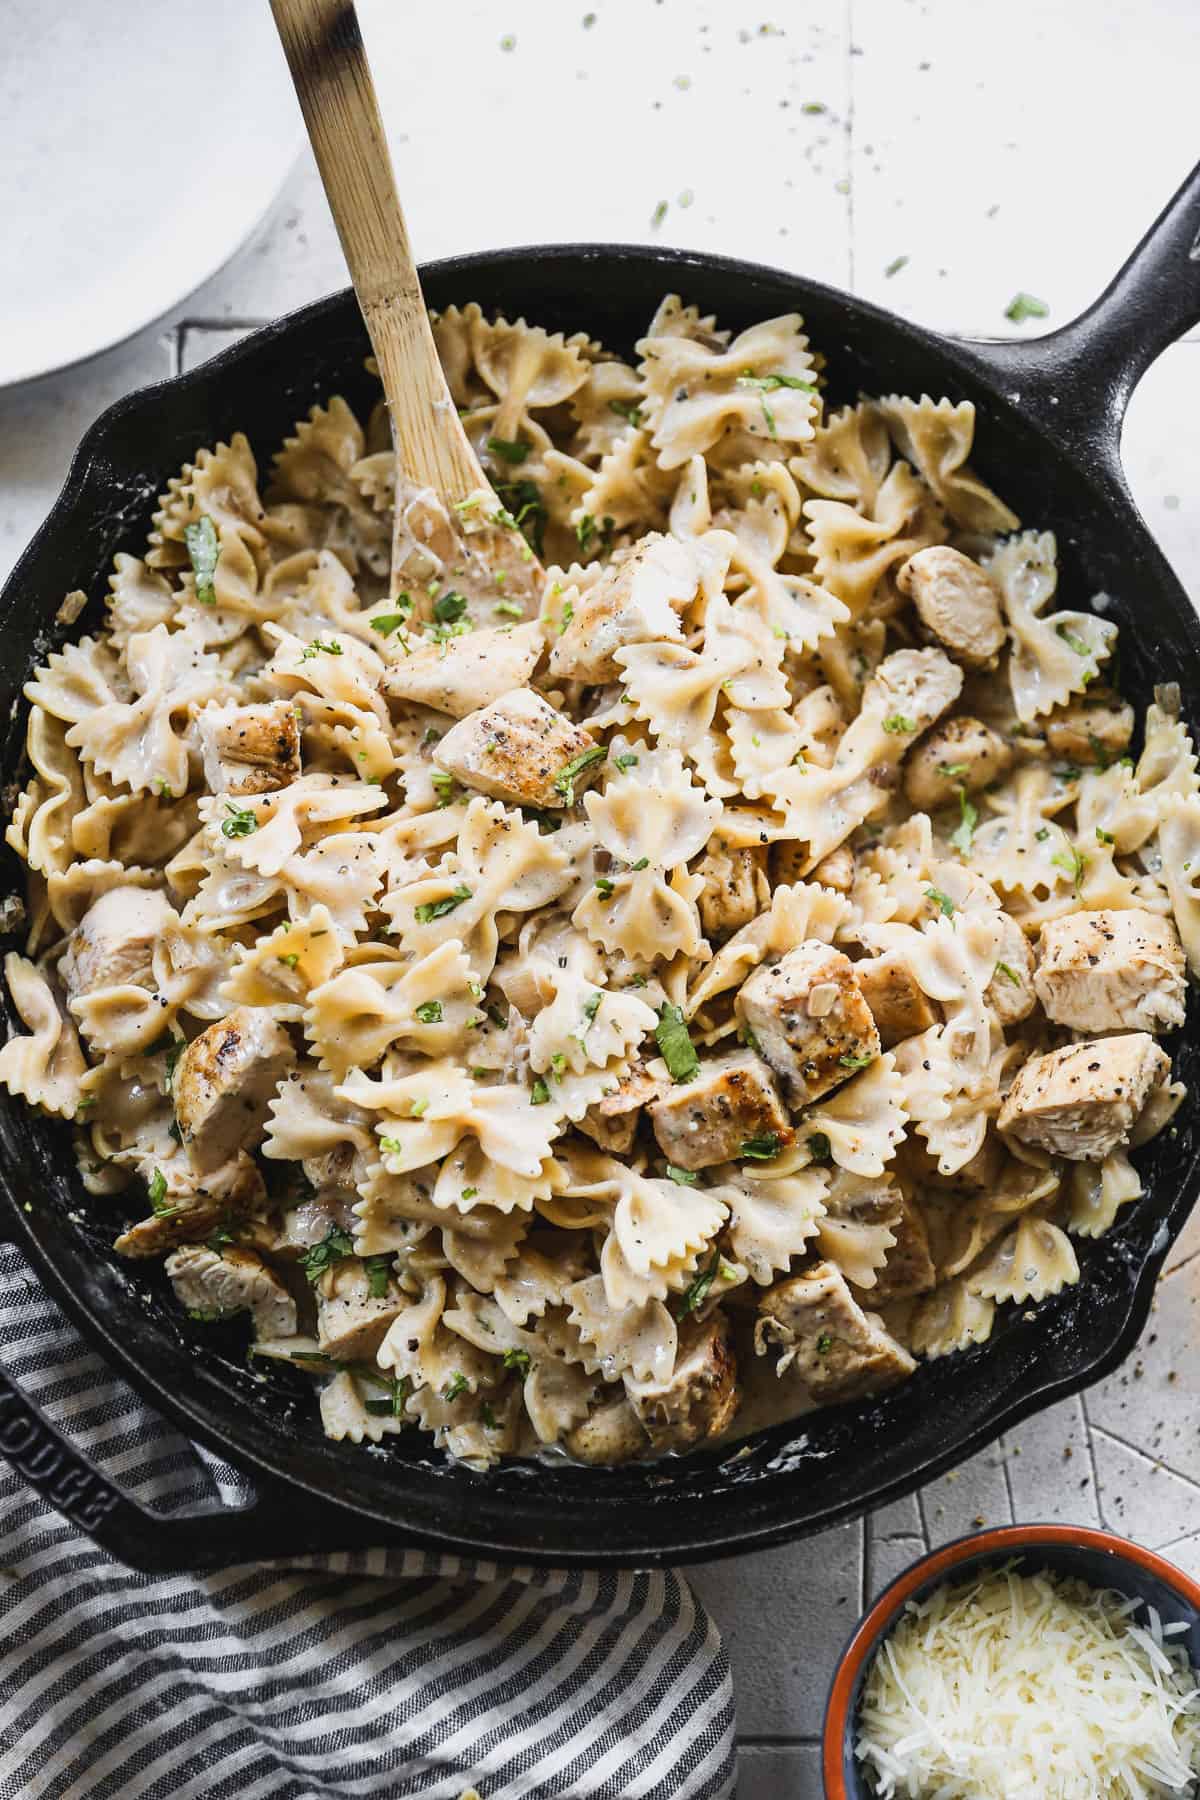 Boursin Pasta with chicken served in a large cast iron skillet